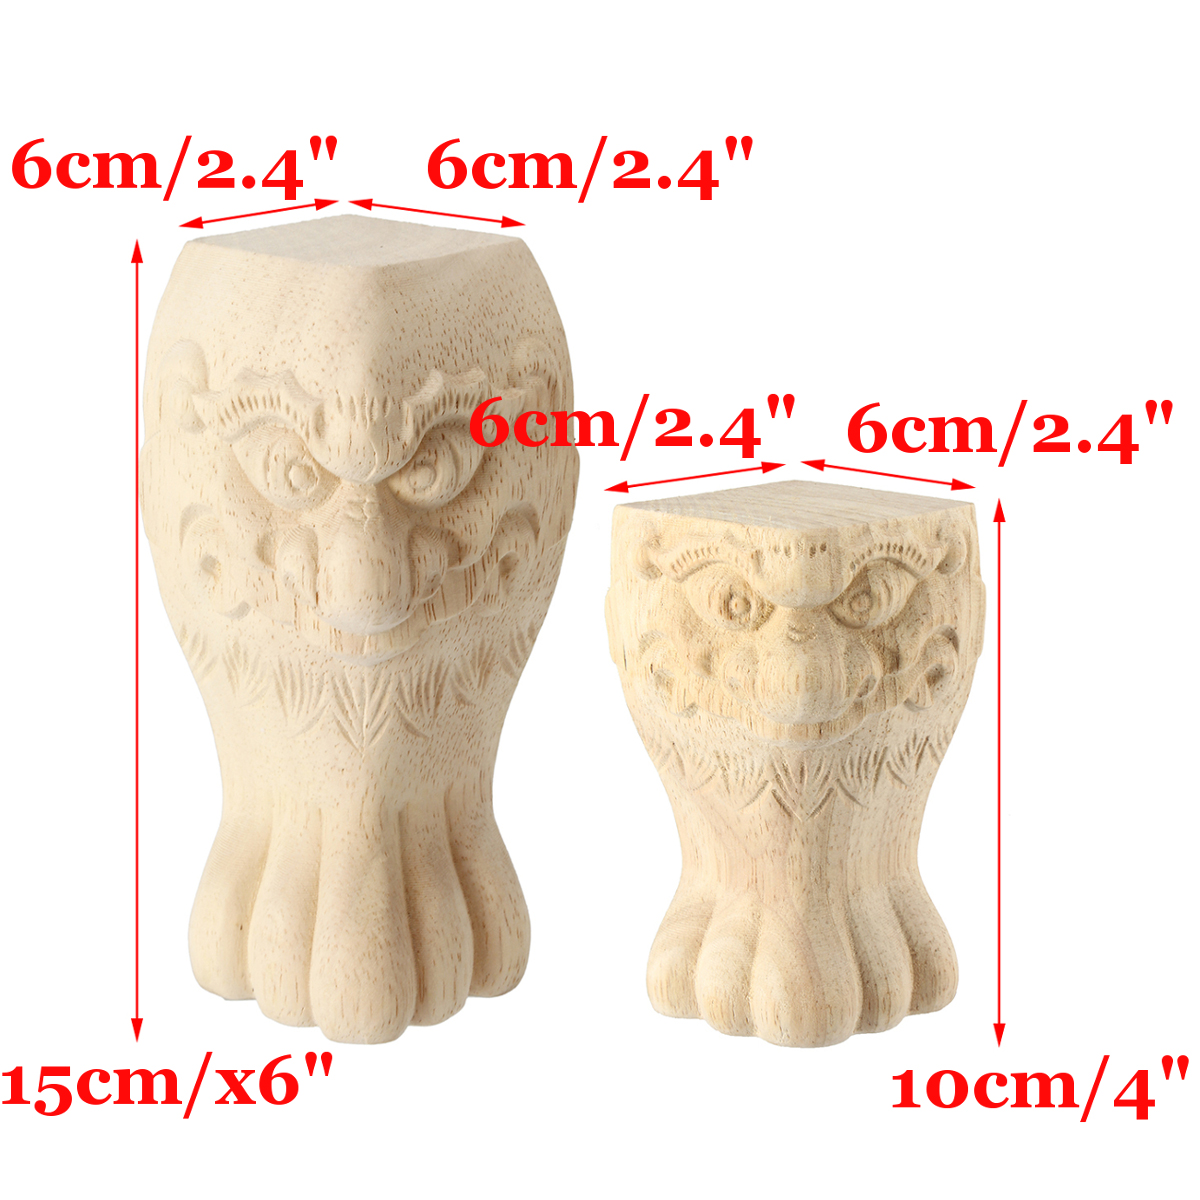 4Pcs-1015cm-European-Solid-Wood-Carving-Furniture-Foot-Legs-Unpainted-Cabinet-Feets-Wood-Decal-1322664-4